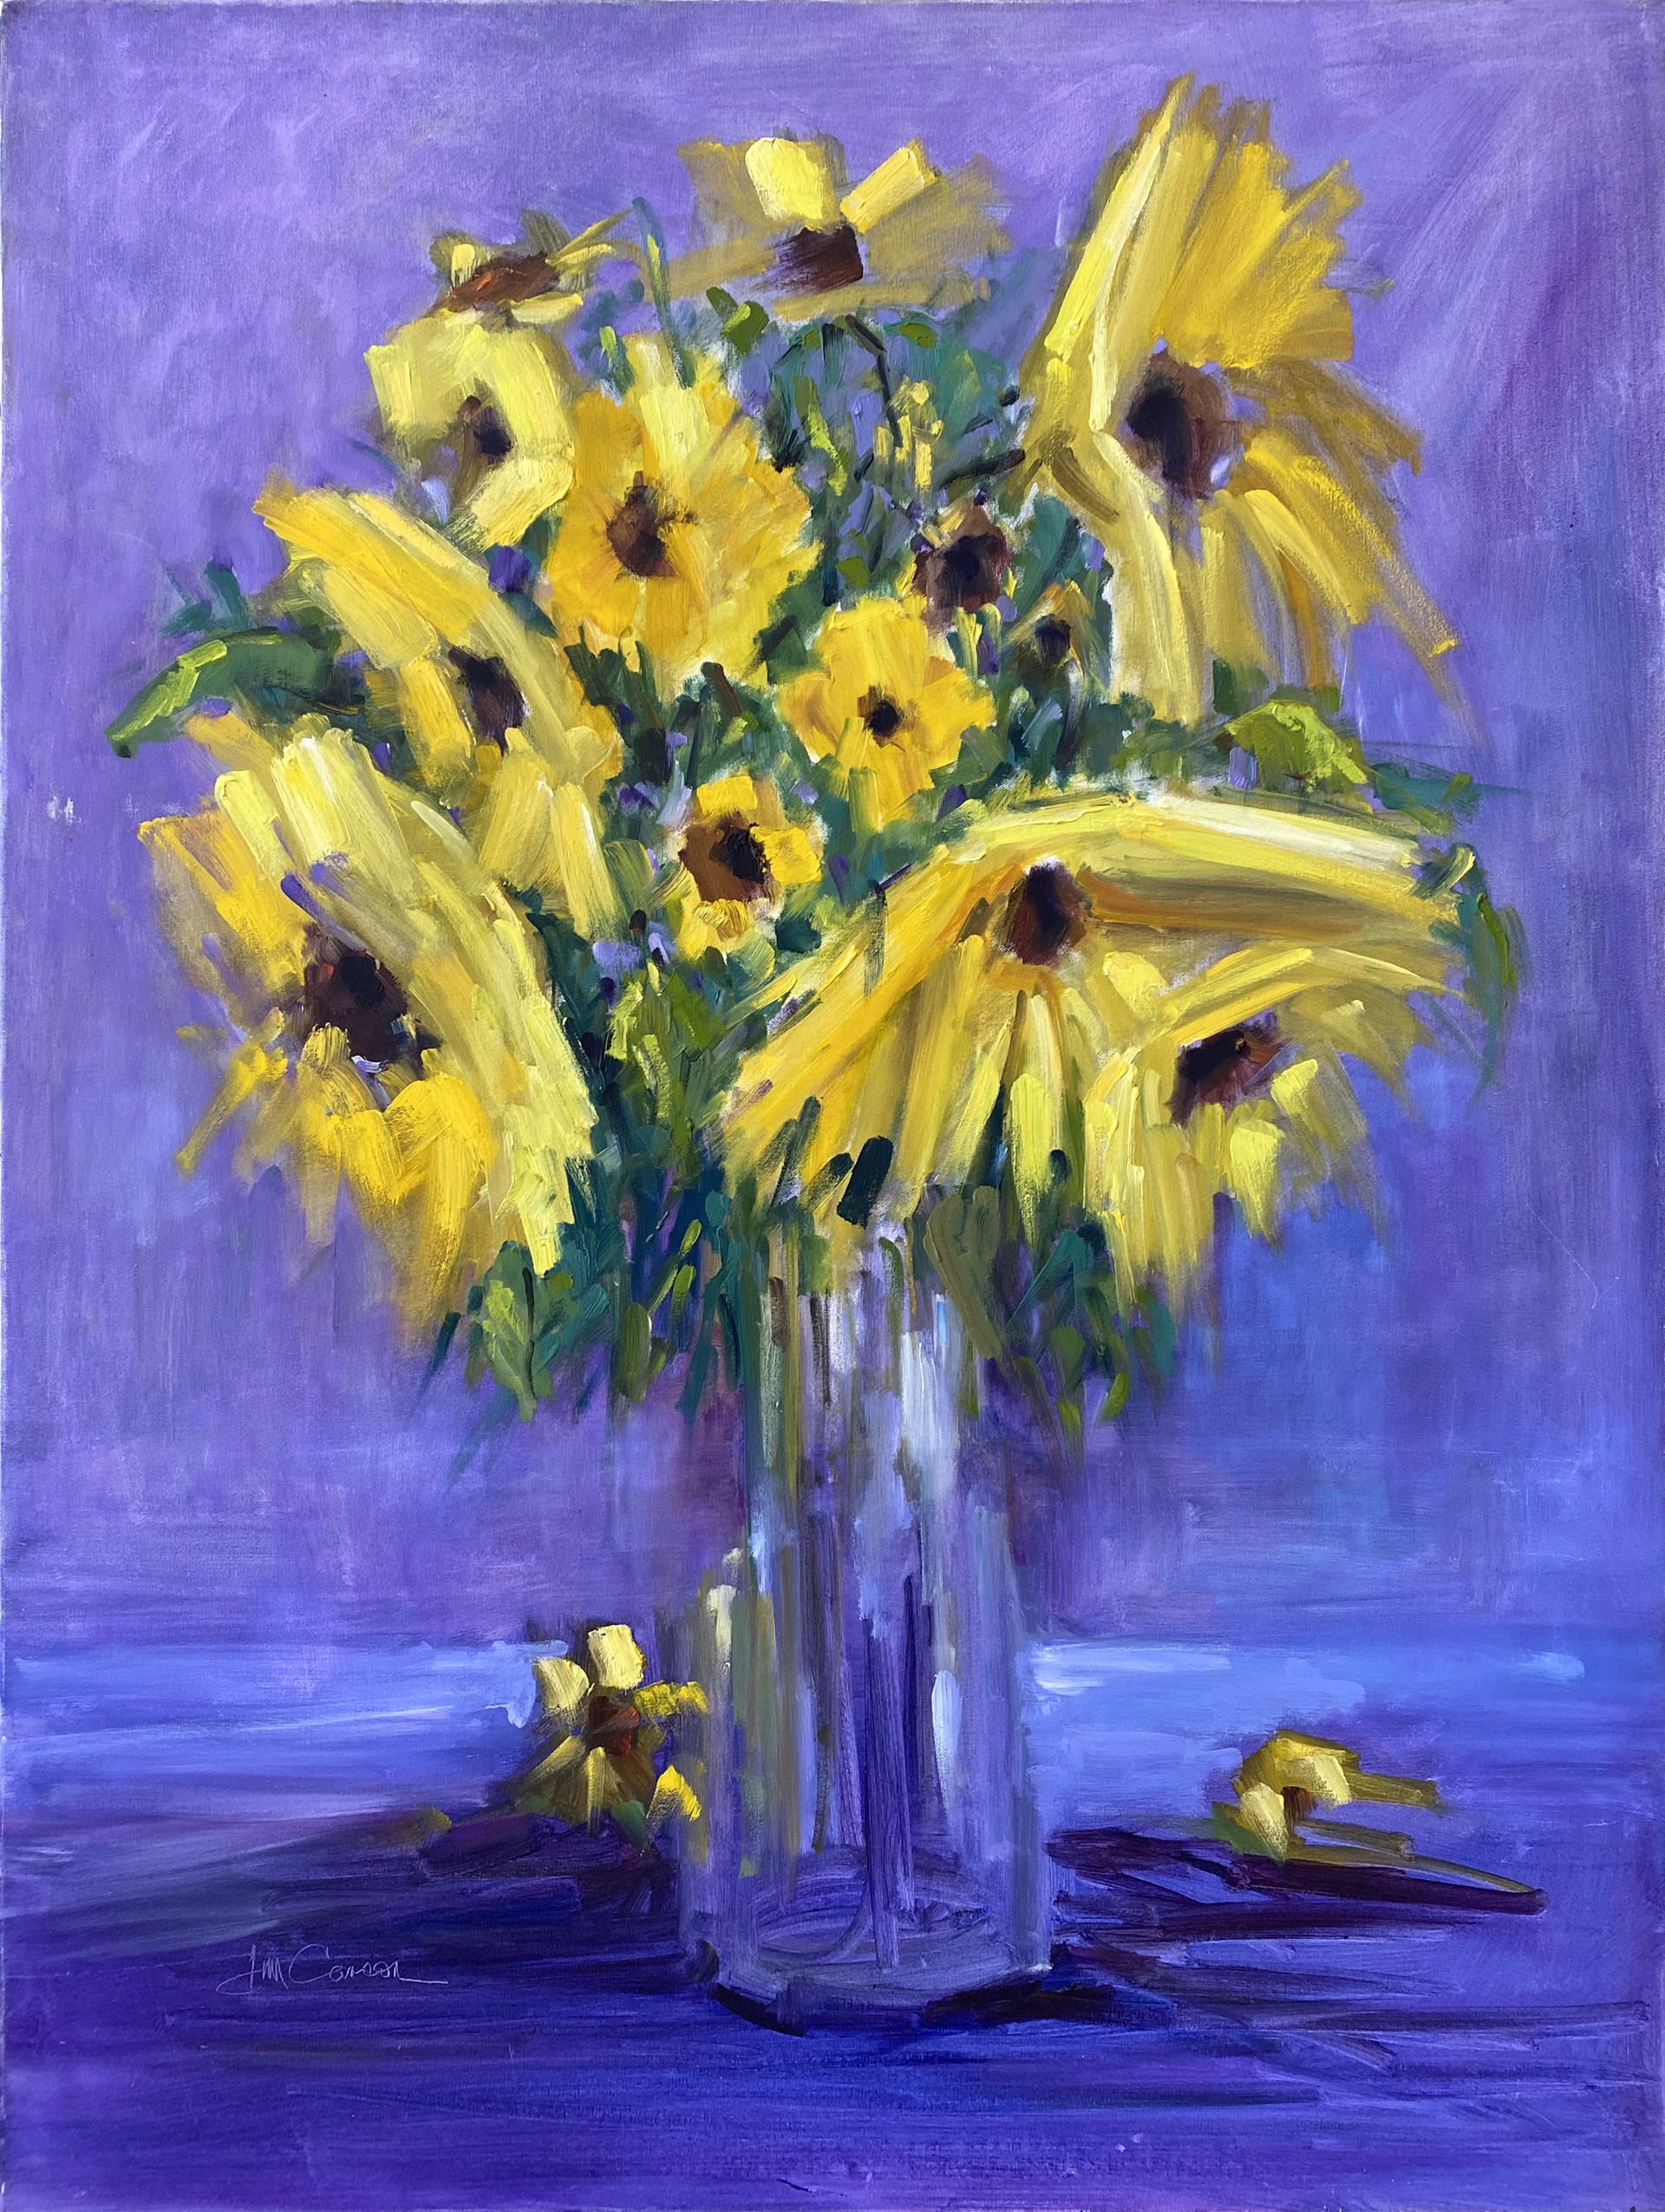 "Sunflowers in Complement" original oil painting by Jim Carson